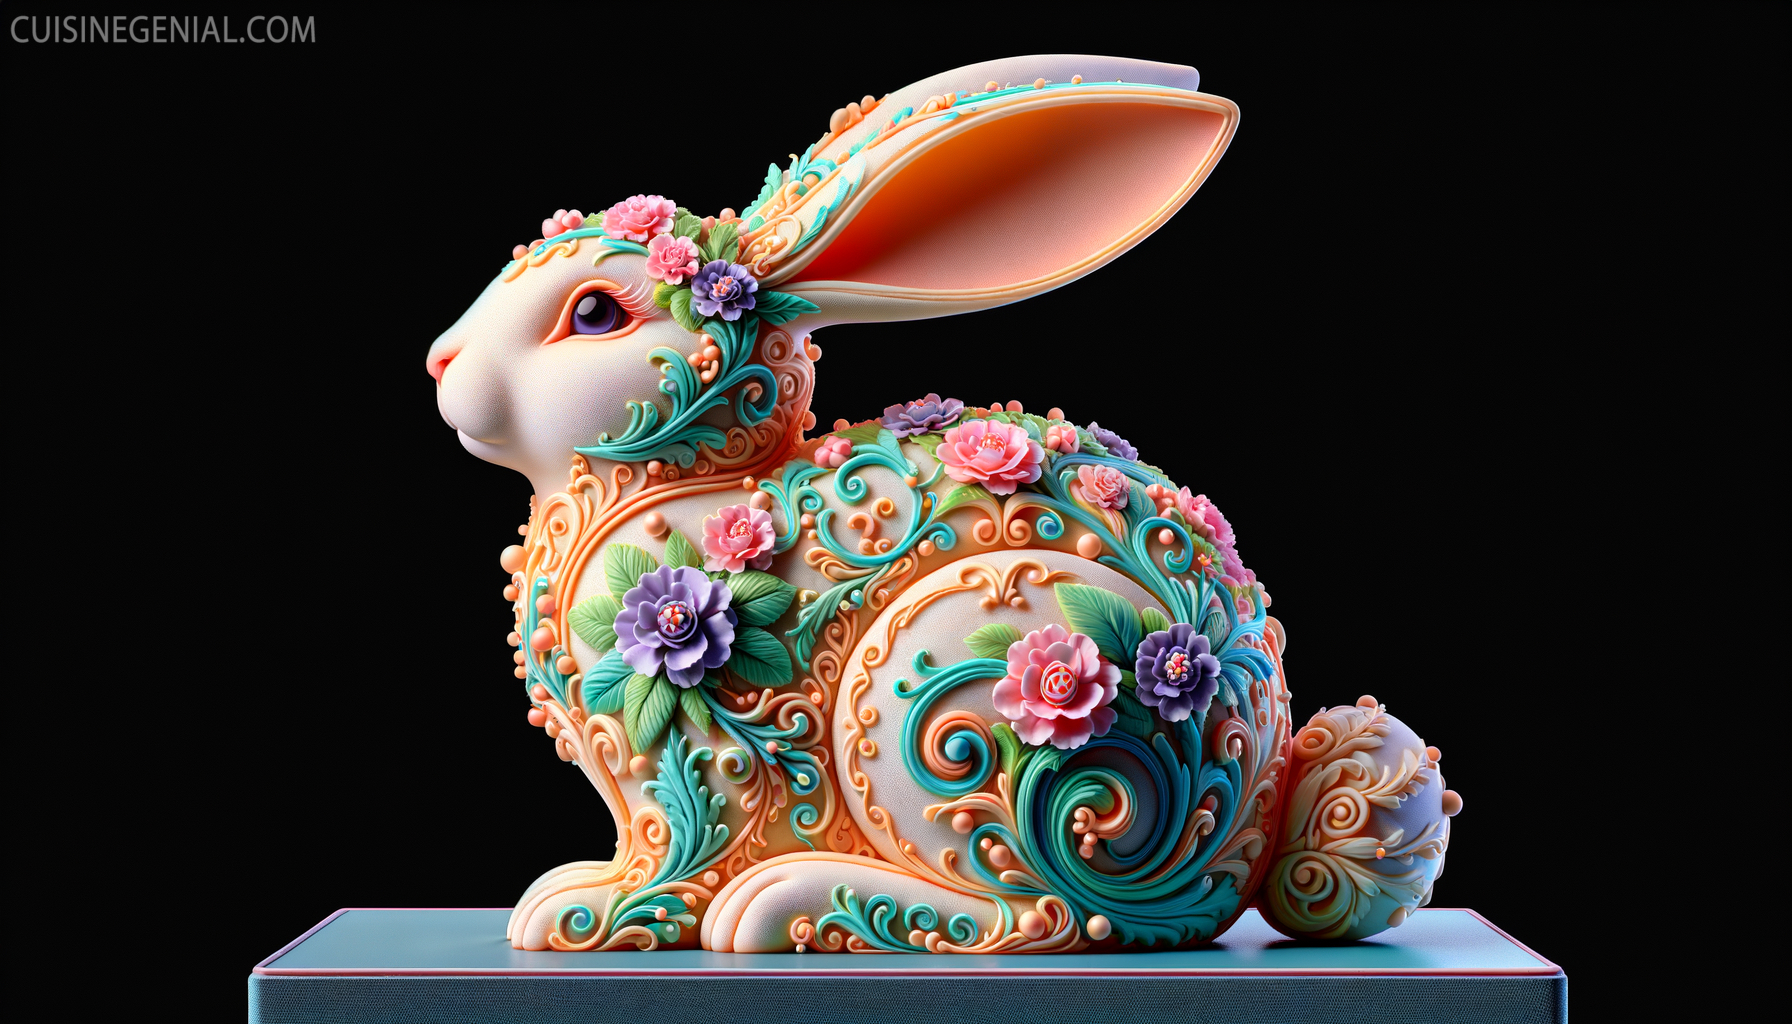 Detailed and realistic image of a three-dimensional bunny cake from the side, showcasing its intricate decorations